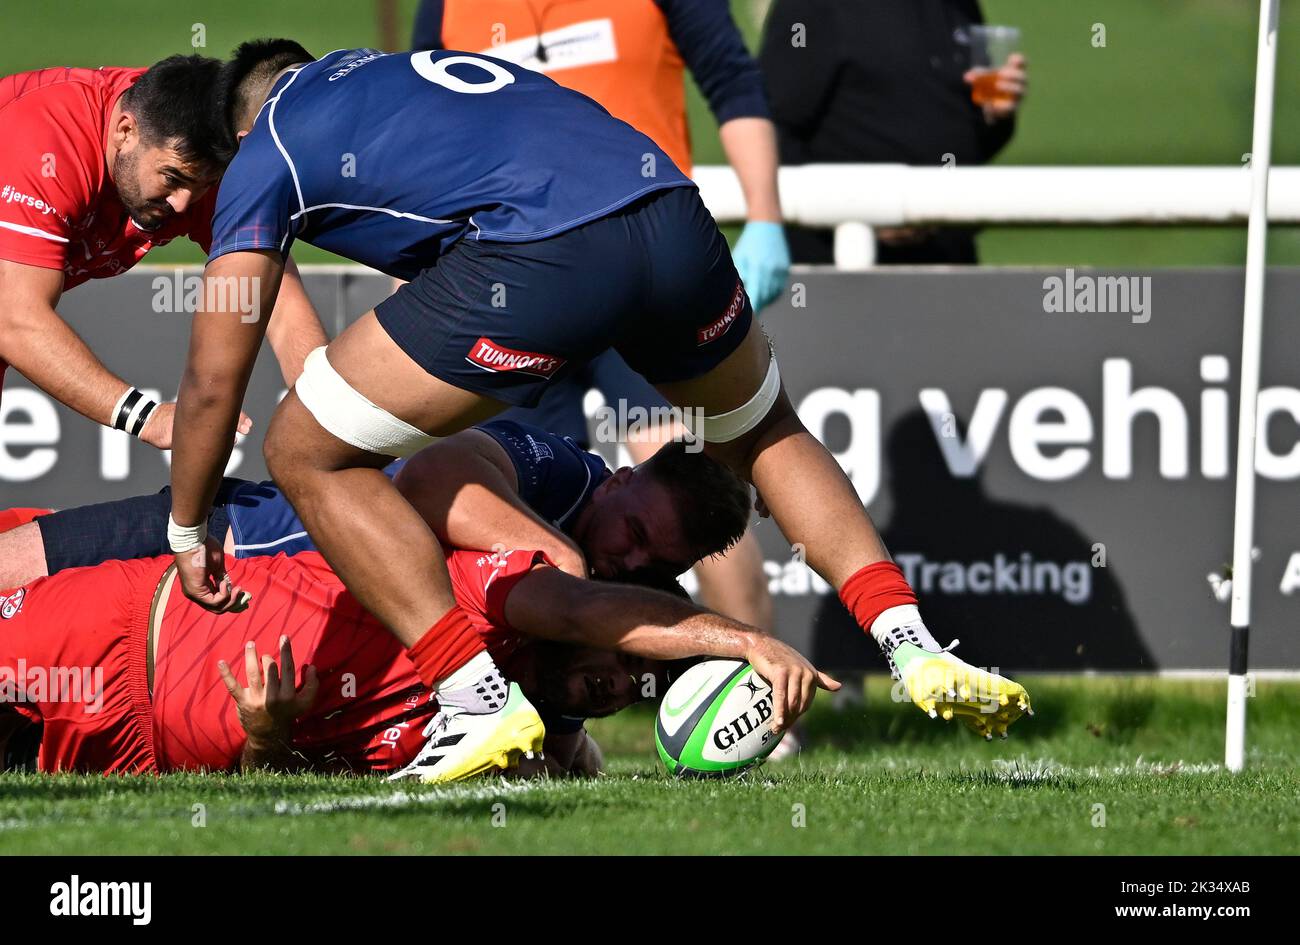 Richmond, United Kingdom. 24th Sep, 2022. Championship Rugby. London Scottish V Jersey Reds. The Richmond Athletic Ground. Richmond. Lewis Wynne (Jersey Reds, captain) stretches to score a try during the London Scottish V Jersey Reds championship rugby match. Credit: Sport In Pictures/Alamy Live News Stock Photo